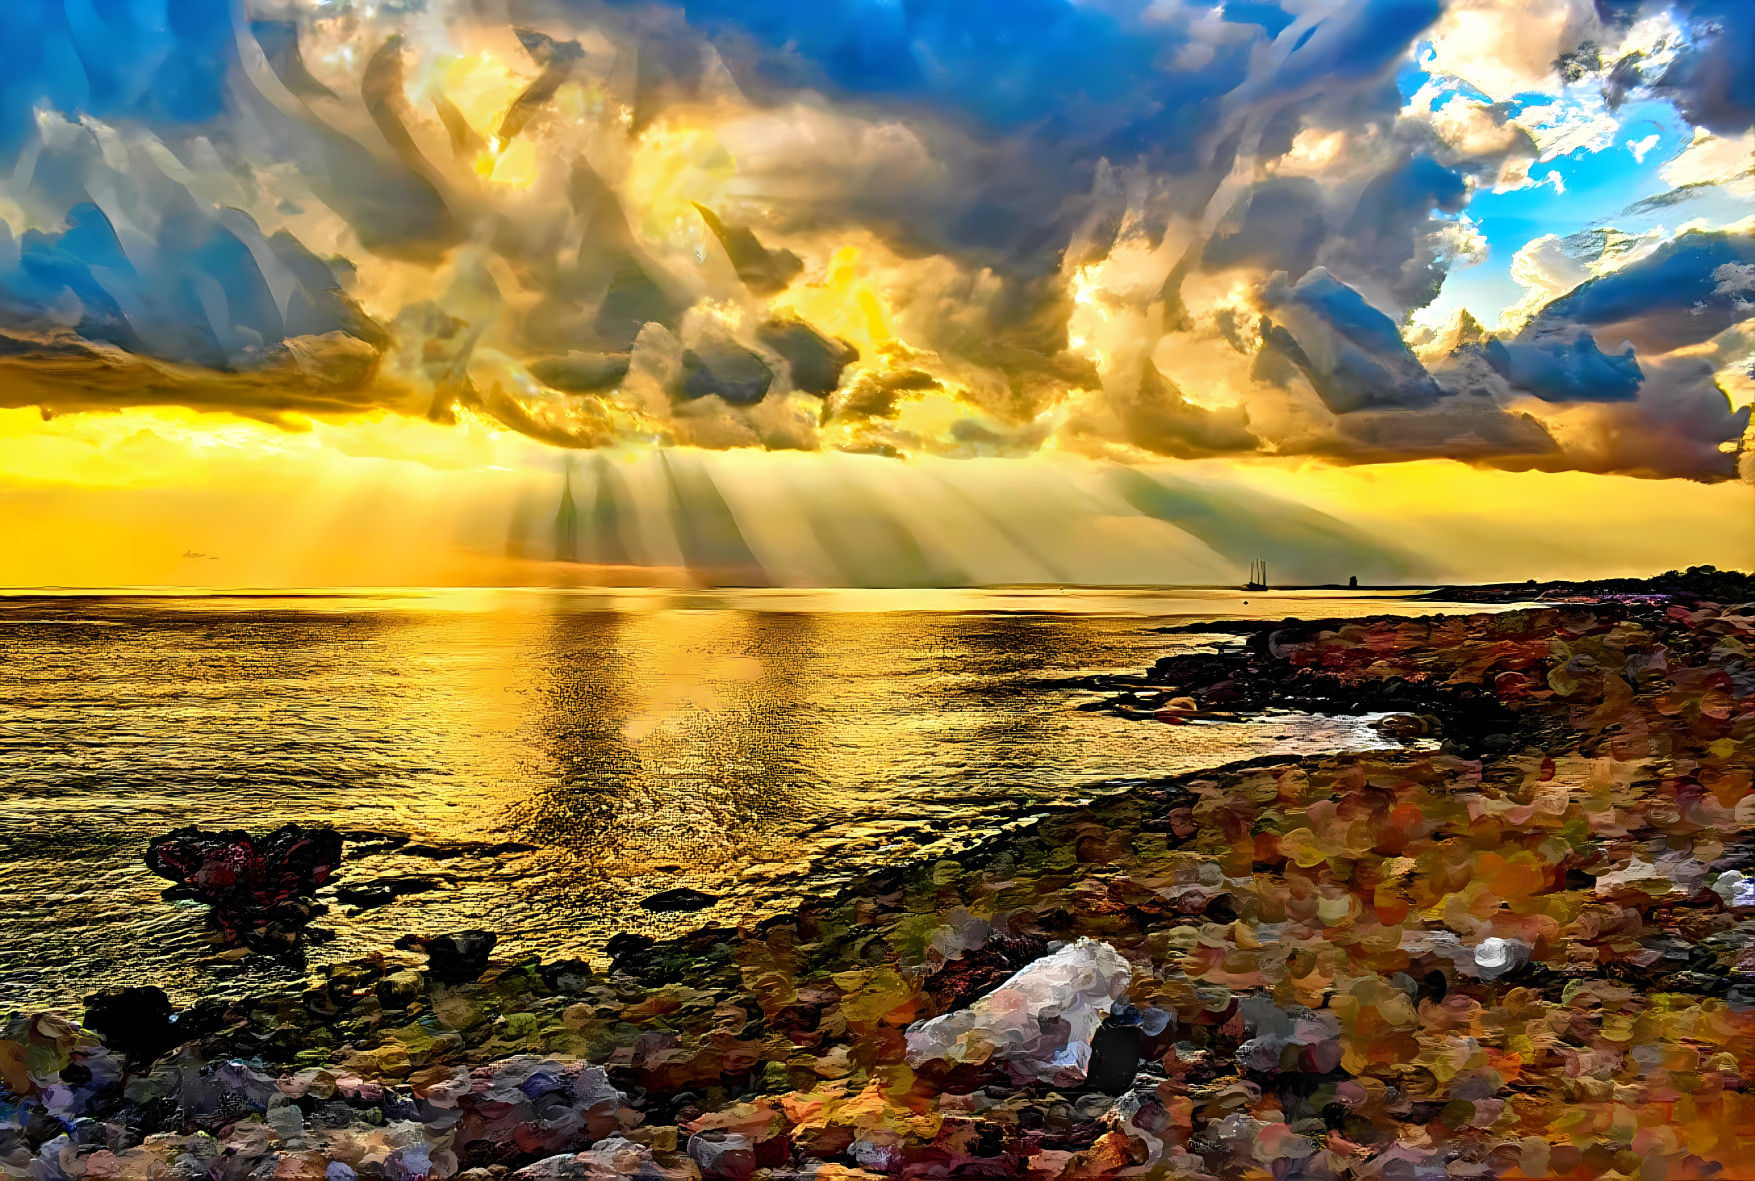 Sunset and Clouds over a rocky beach